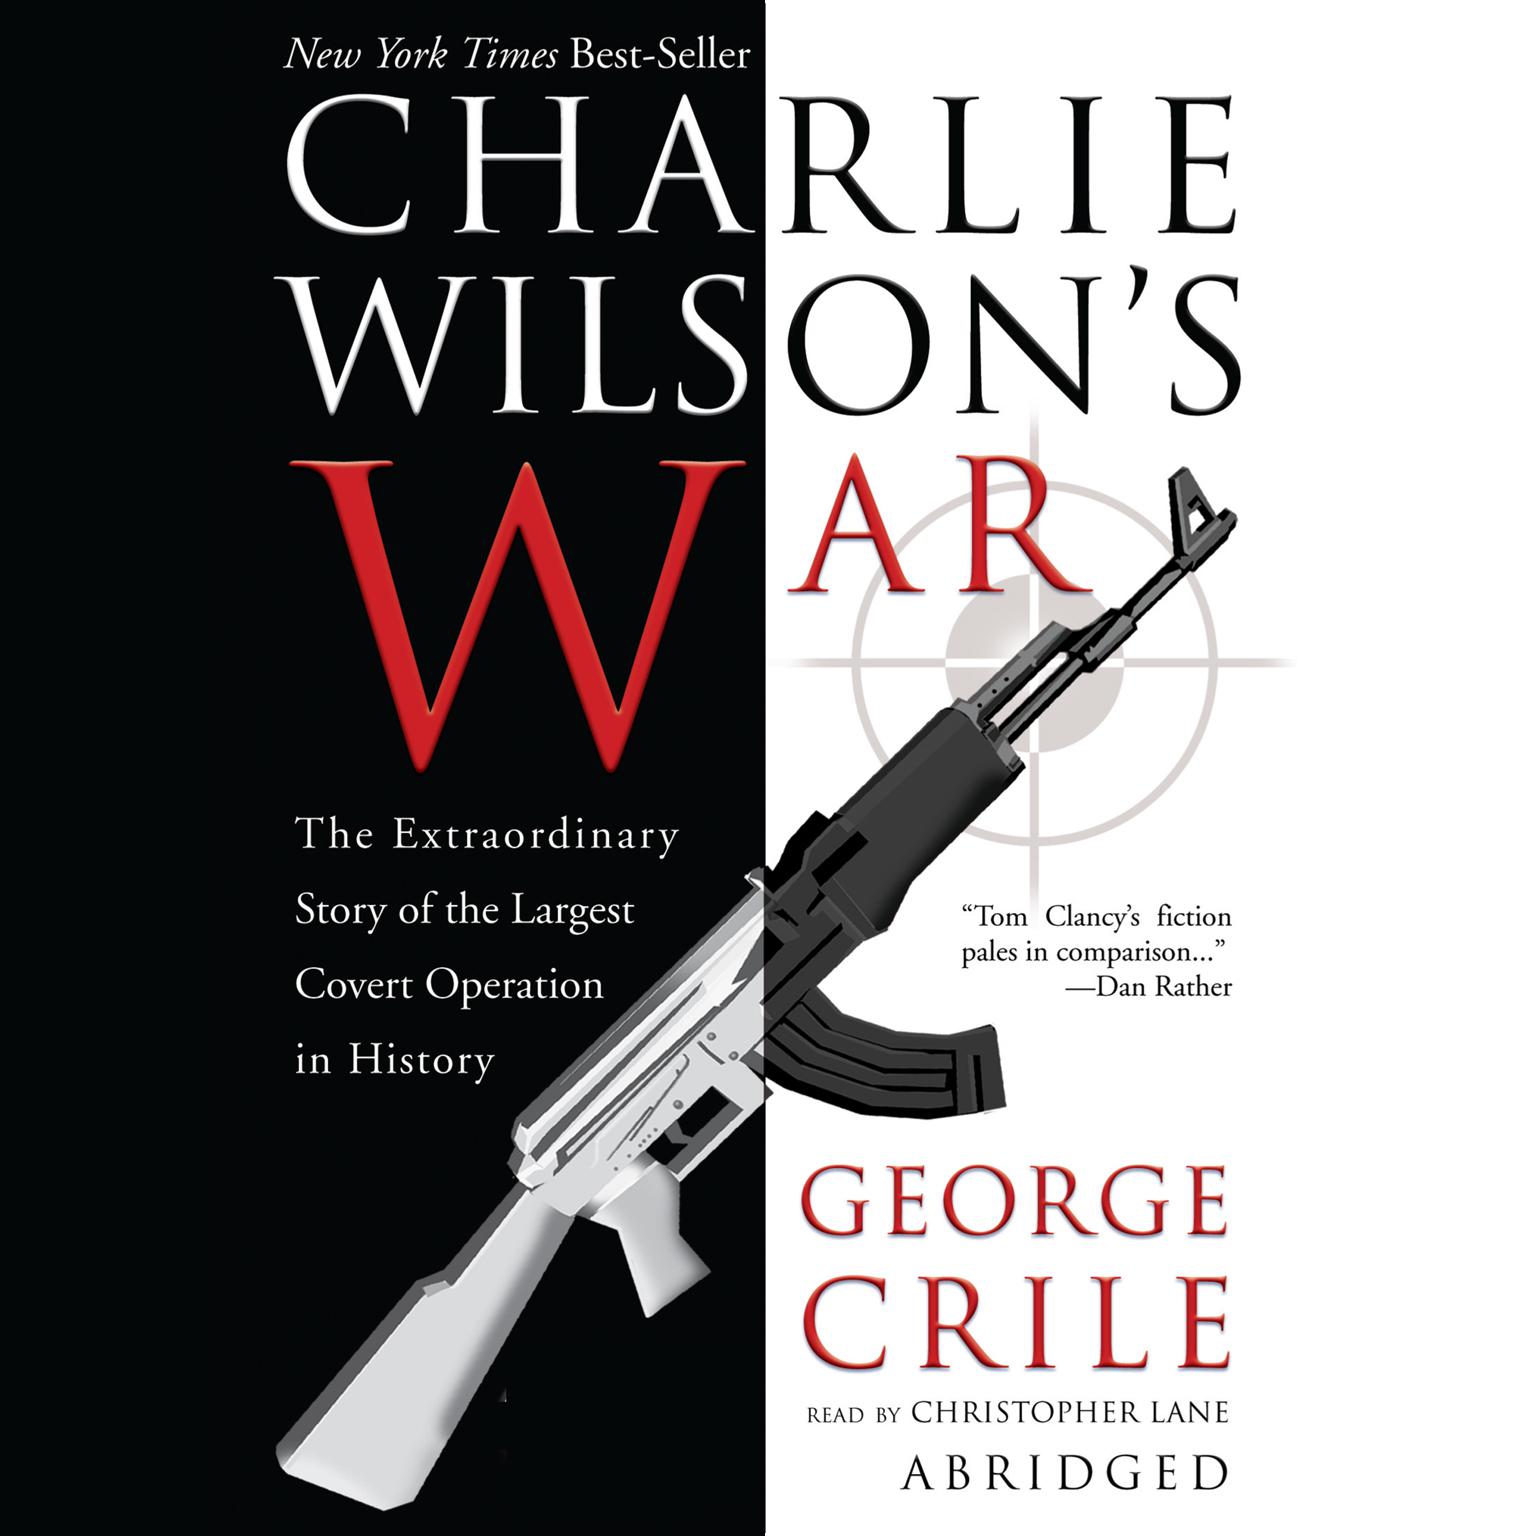 Charlie Wilson’s War (Abridged): The Extraordinary Story of How the Wildest Man in Congress and a Rogue CIA Agent Changed the History of Our Times Audiobook, by George Crile